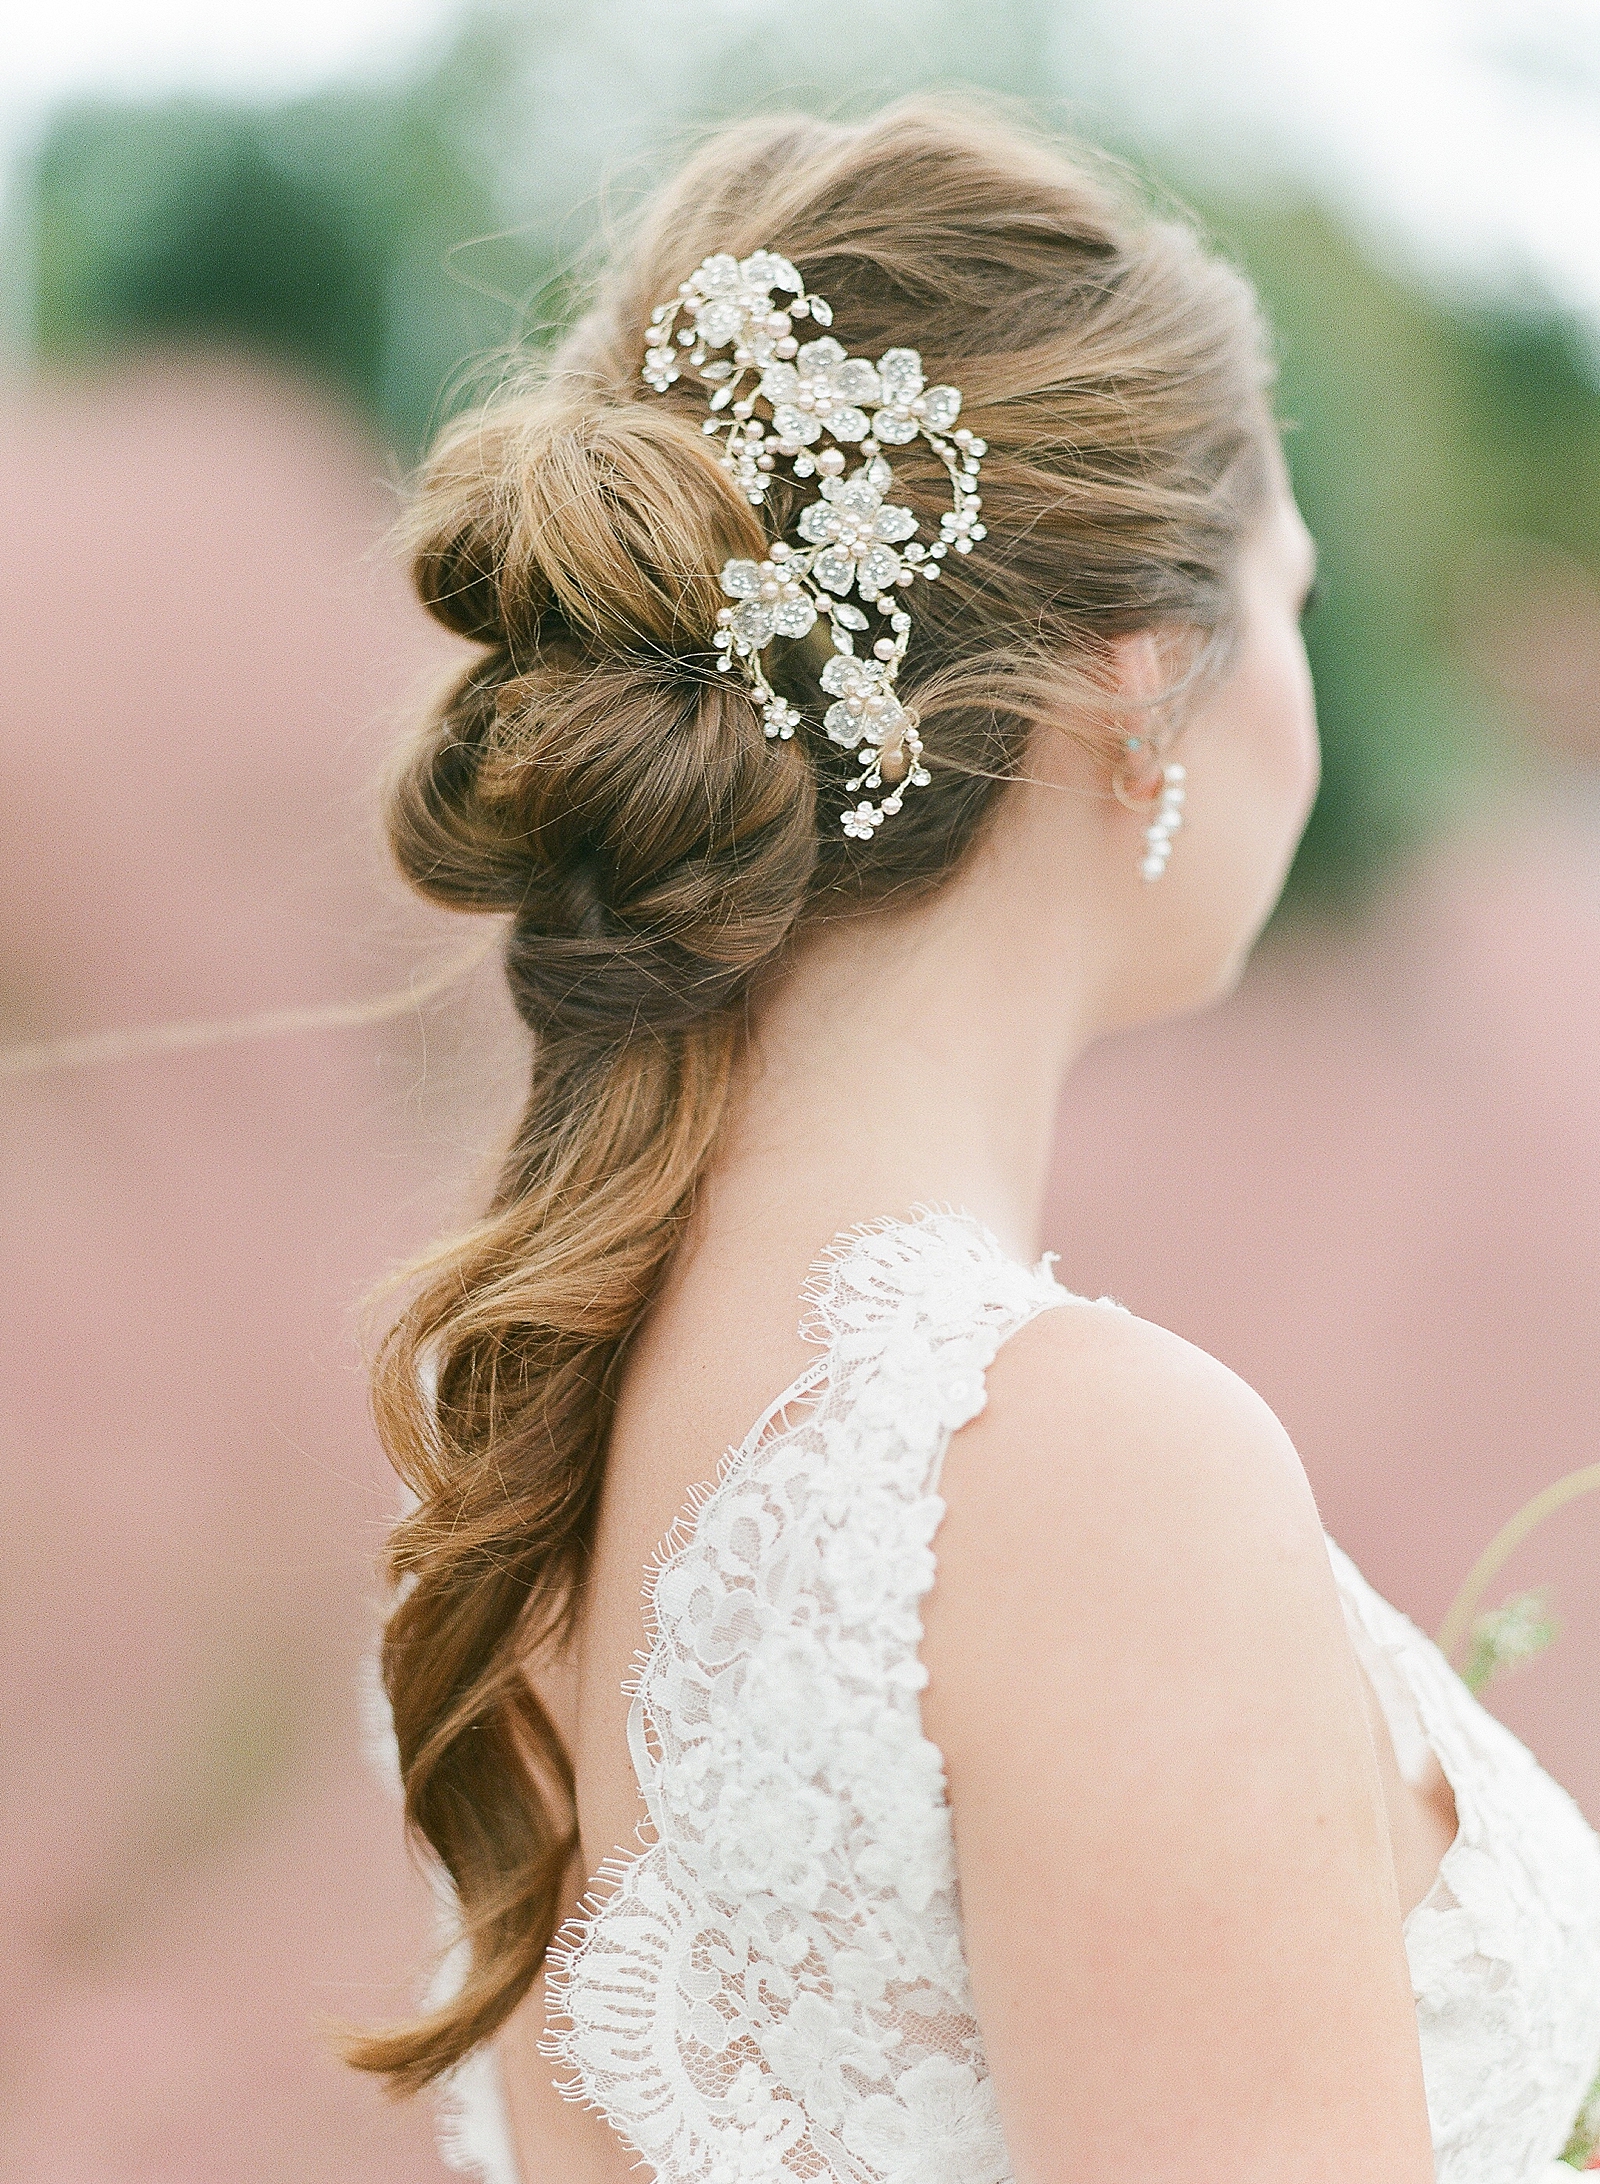 Asheville Bridal Editorial Detail of Brides HairStyle with Hair Accessory Photo